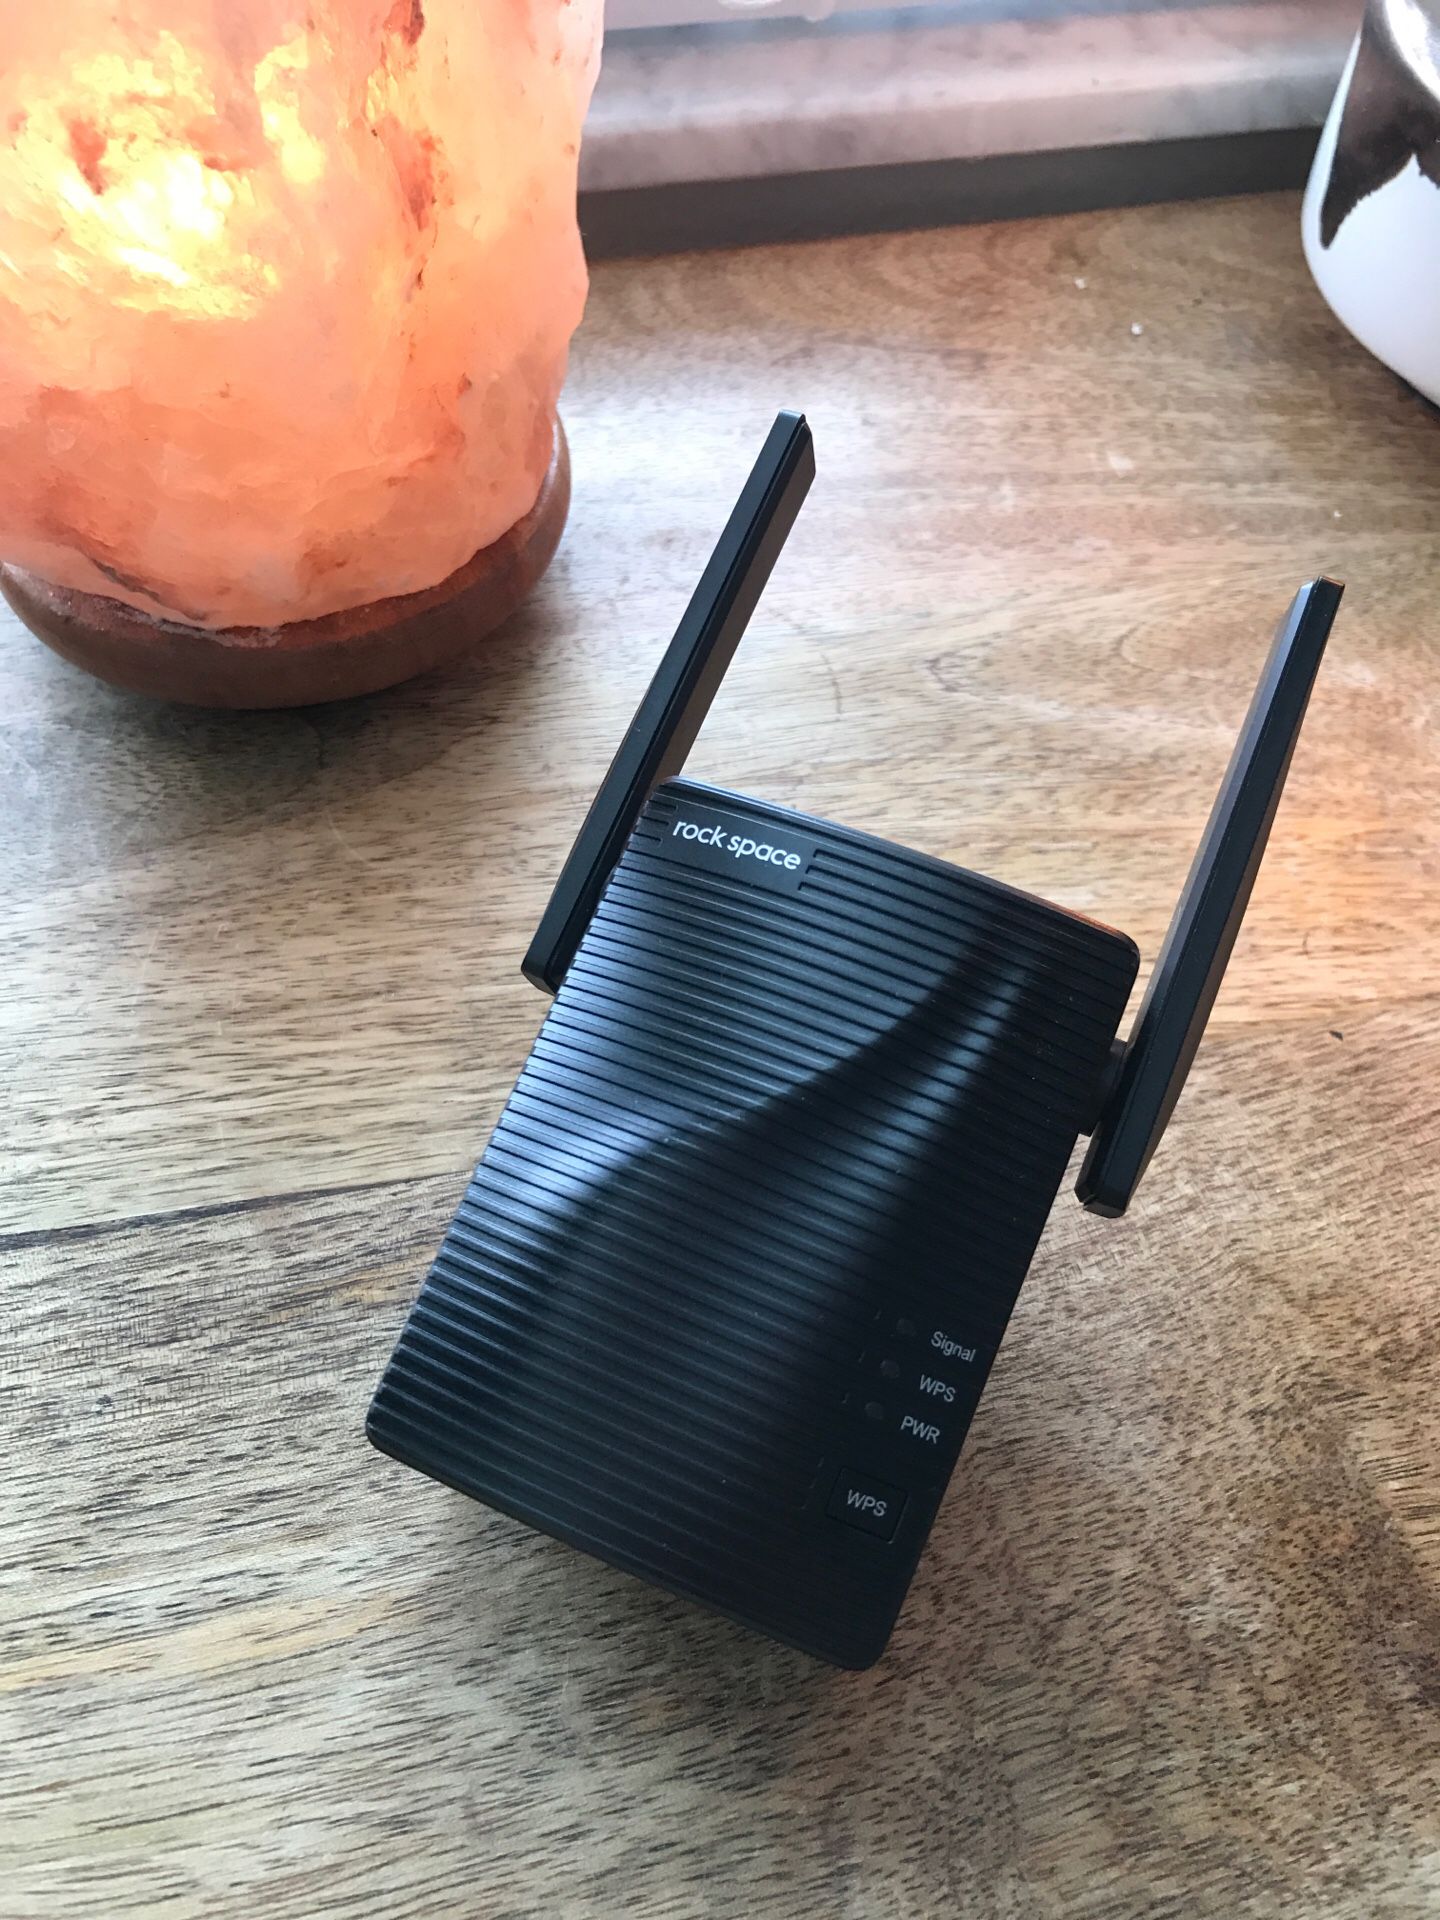 Rock Space AC750 Dual Band WiFi Repeater Wifi Extender